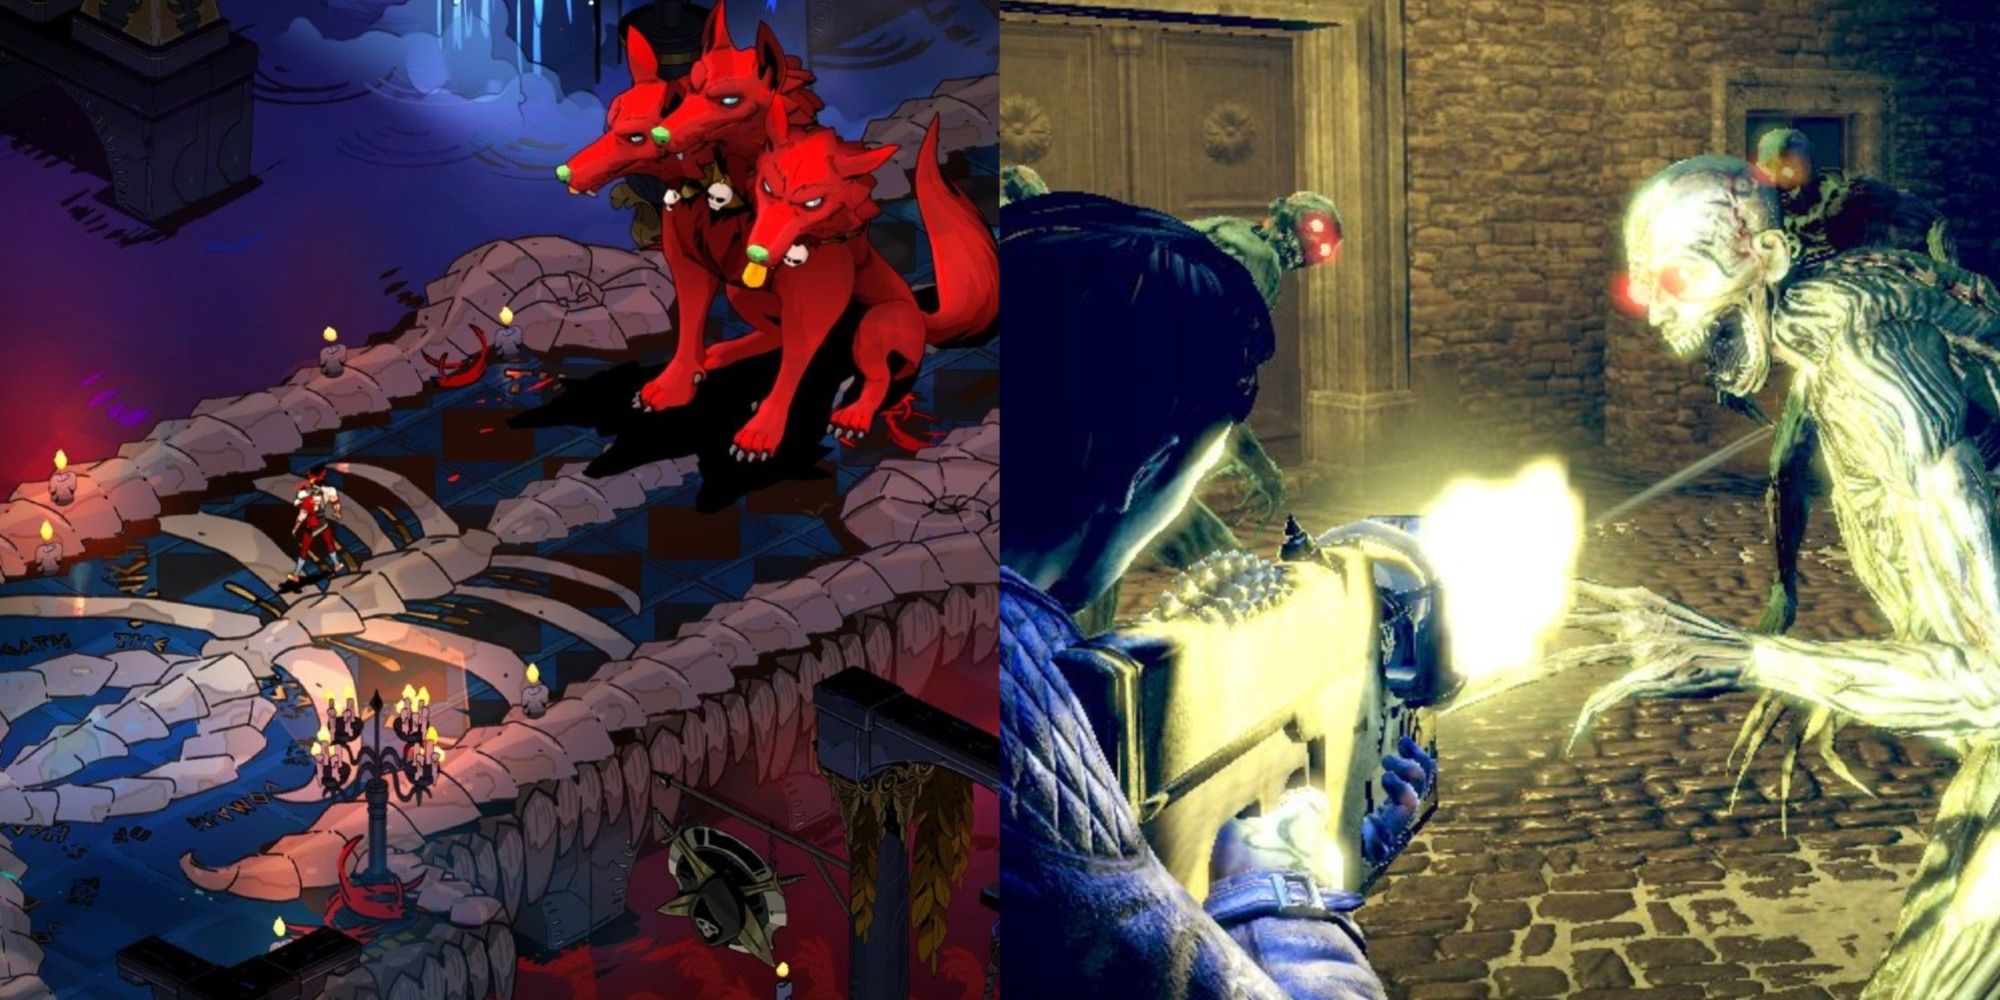 Games Set In Hell Featured Split Image Of Hades And Shadows Of The Damned